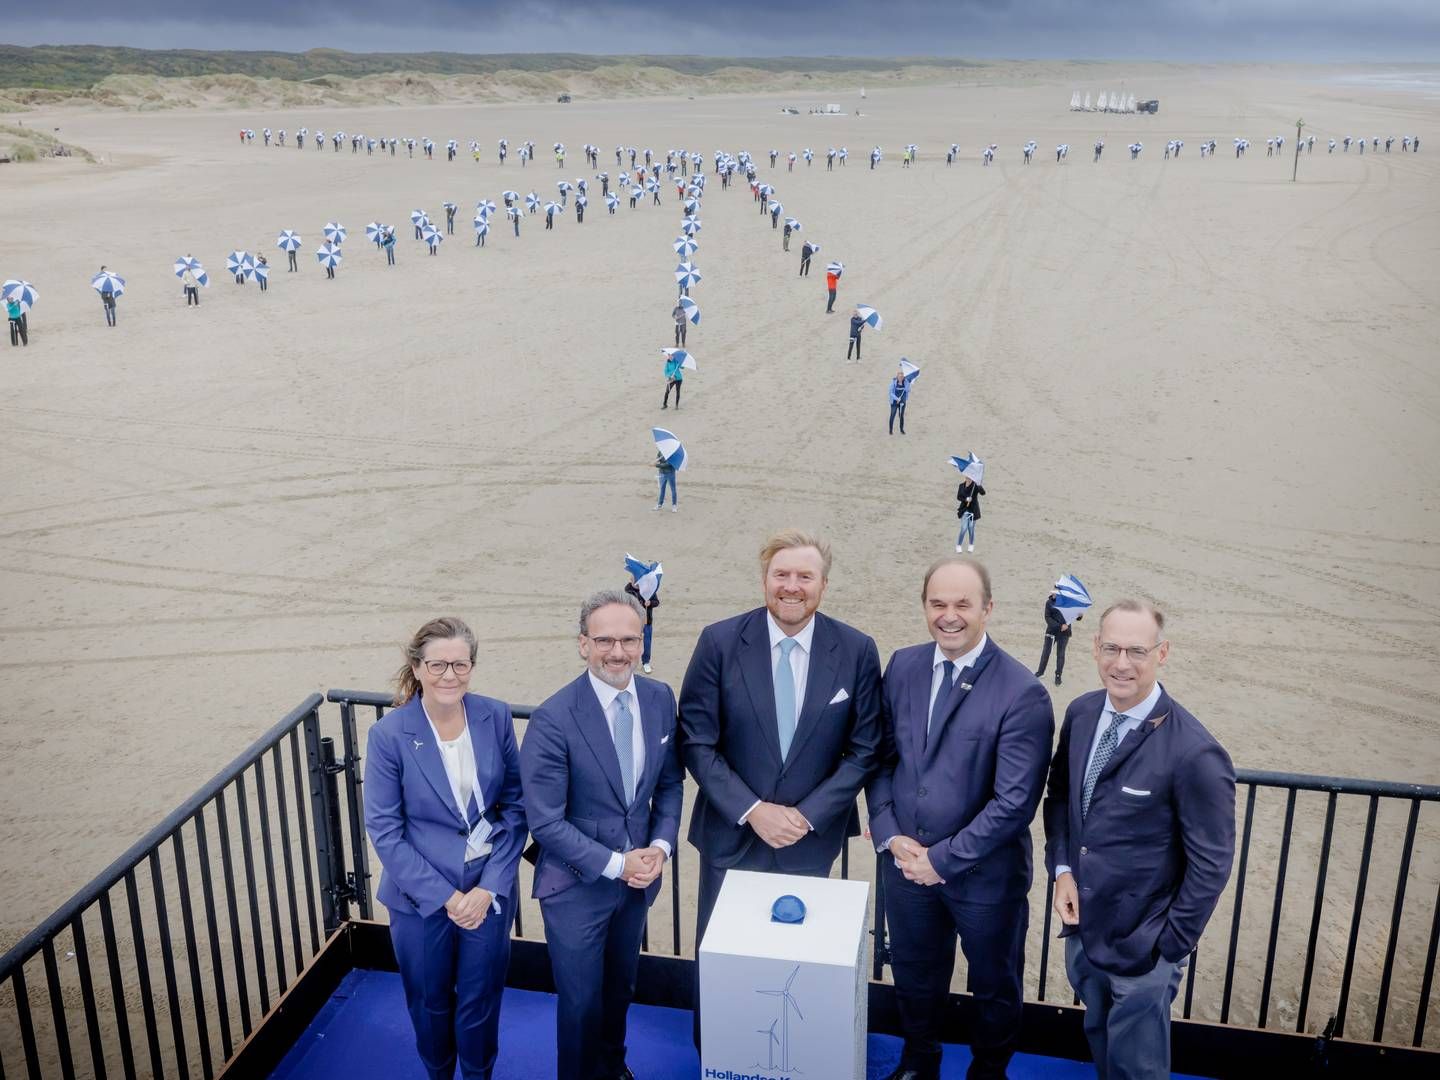 On Sept. 29, the head of Vattenfall's wind business, Helene Biström (left), helped inaugurate Hollandse Kust Zuid. Unlike BASF CEO Martin Brudermüller (second from left), she does not see Chinese turbines as an obvious choice for future offshore wind farms in Europe. | Photo: Jorrit Lousberg/light at Work Photography